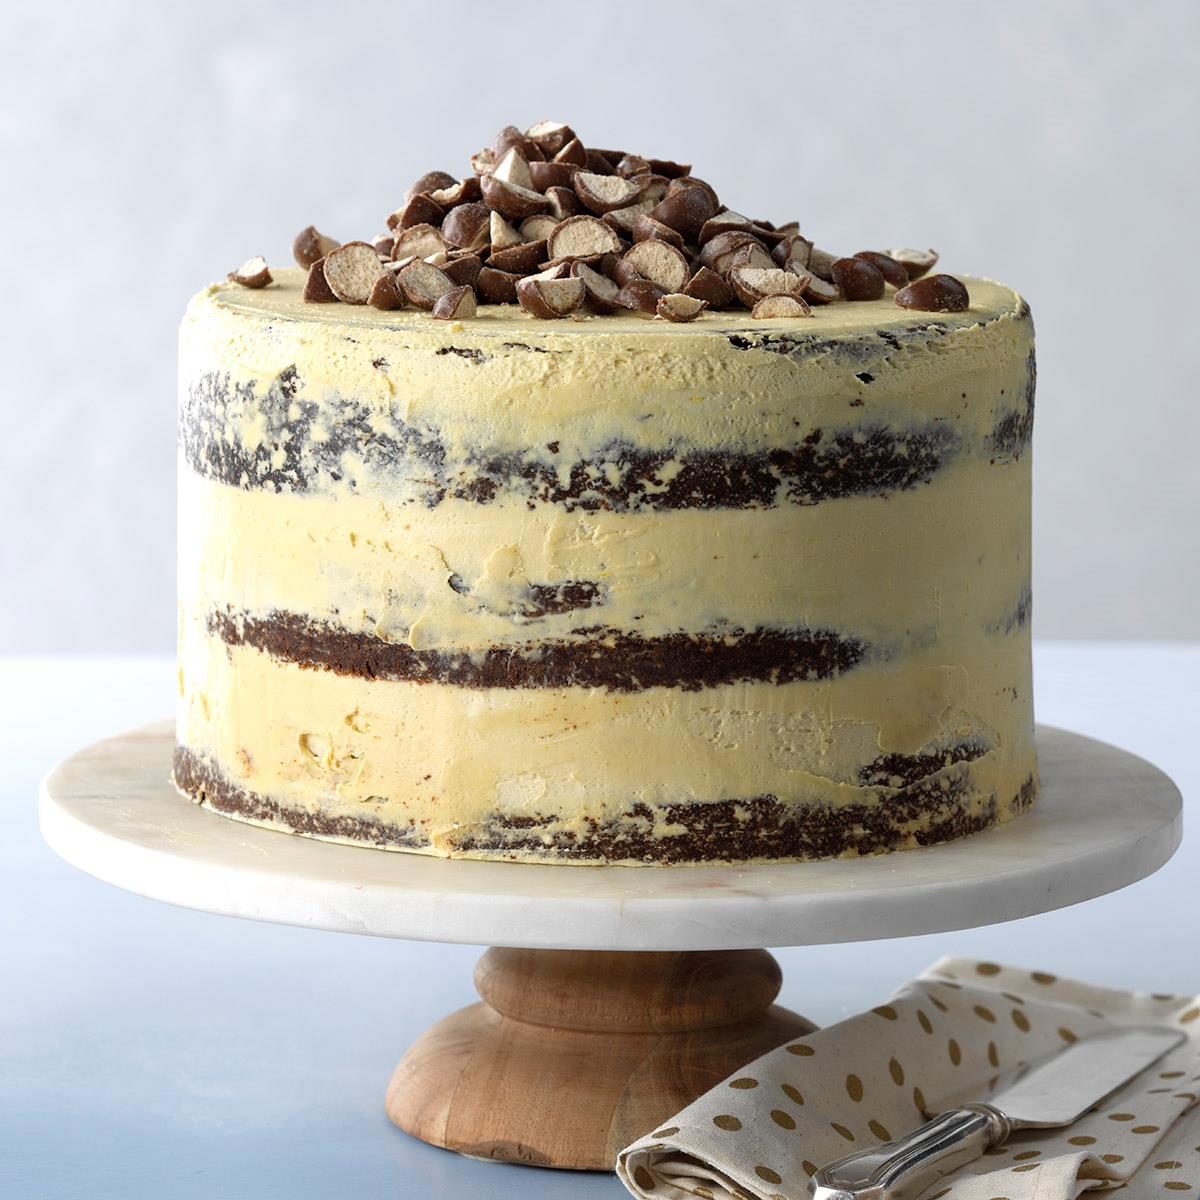 https://www.tasteofhome.com/wp-content/uploads/2018/01/Malted-Chocolate-Stout-Layer-Cake_EXPS_THCA19_110952_C02_23_5b-6.jpg?fit=700%2C1024